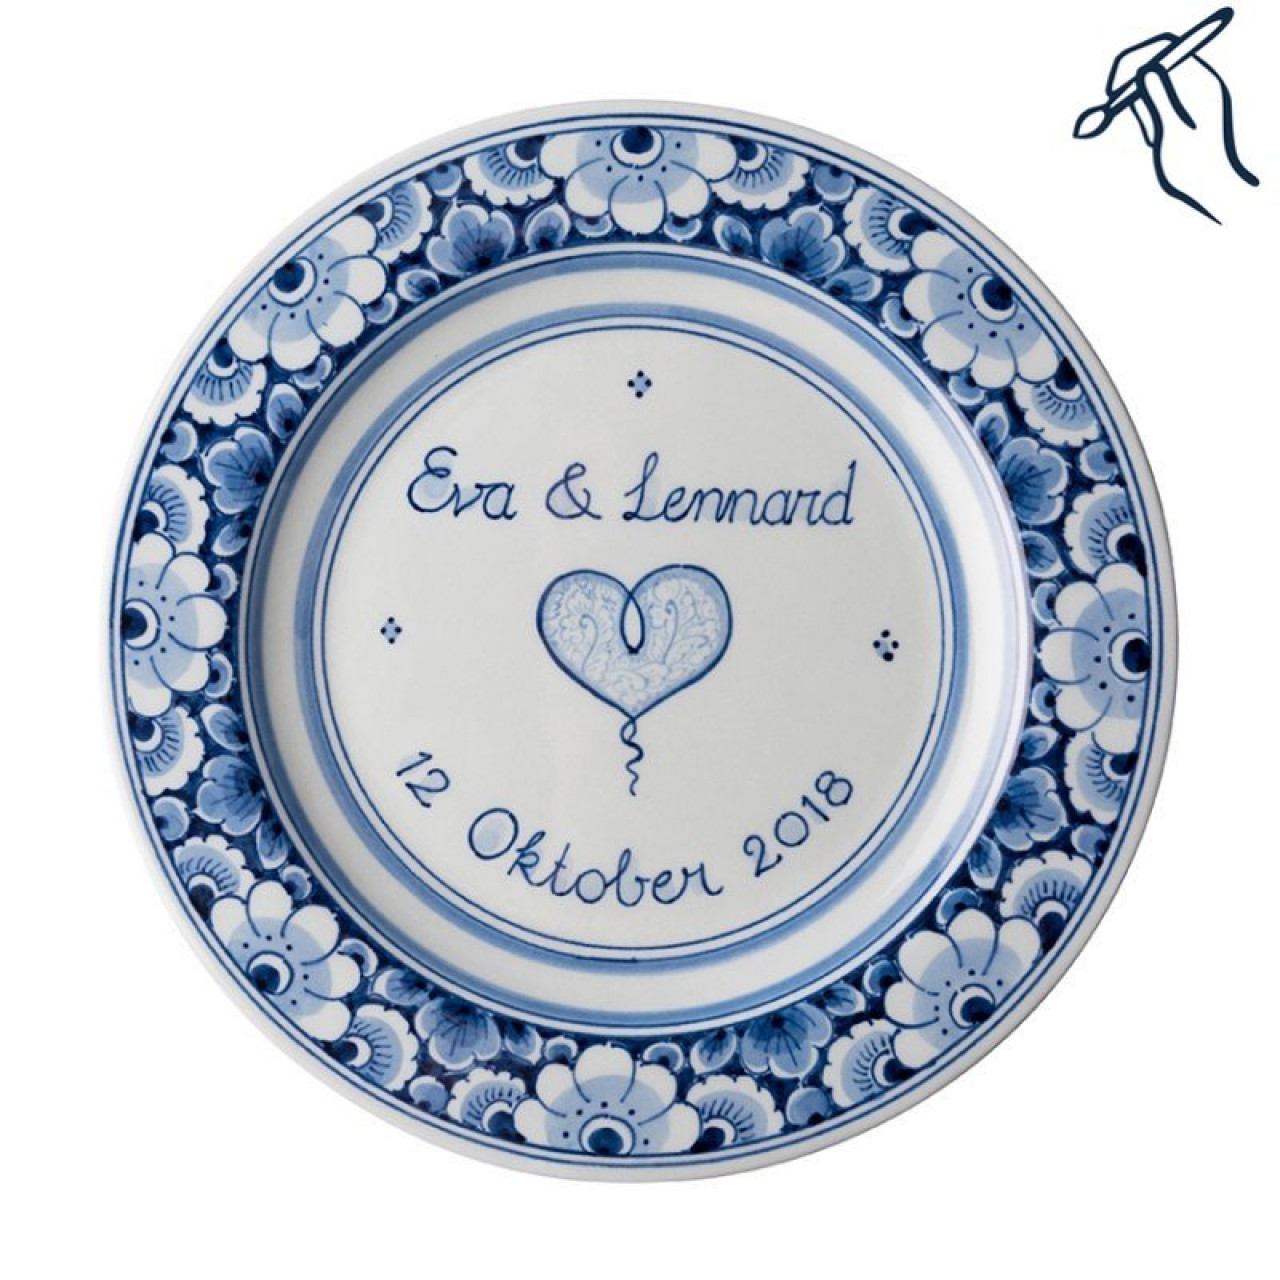 Customized plate 18 (incl. 25 characters) » Heinen Delfts Blauw